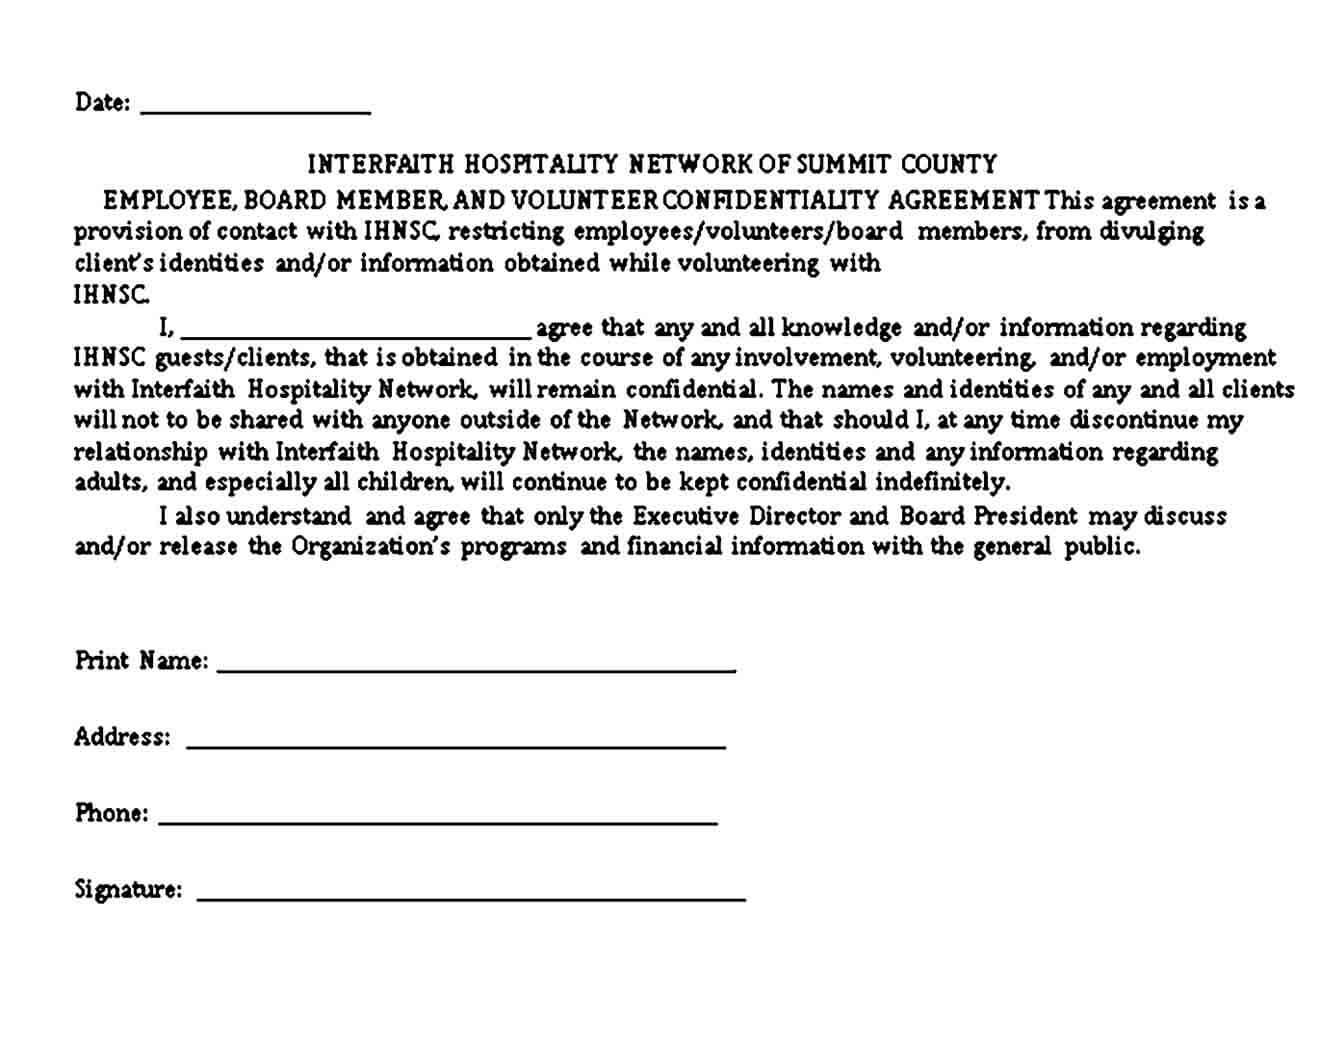 Confidentiality Agreement for Volunteers and Employees